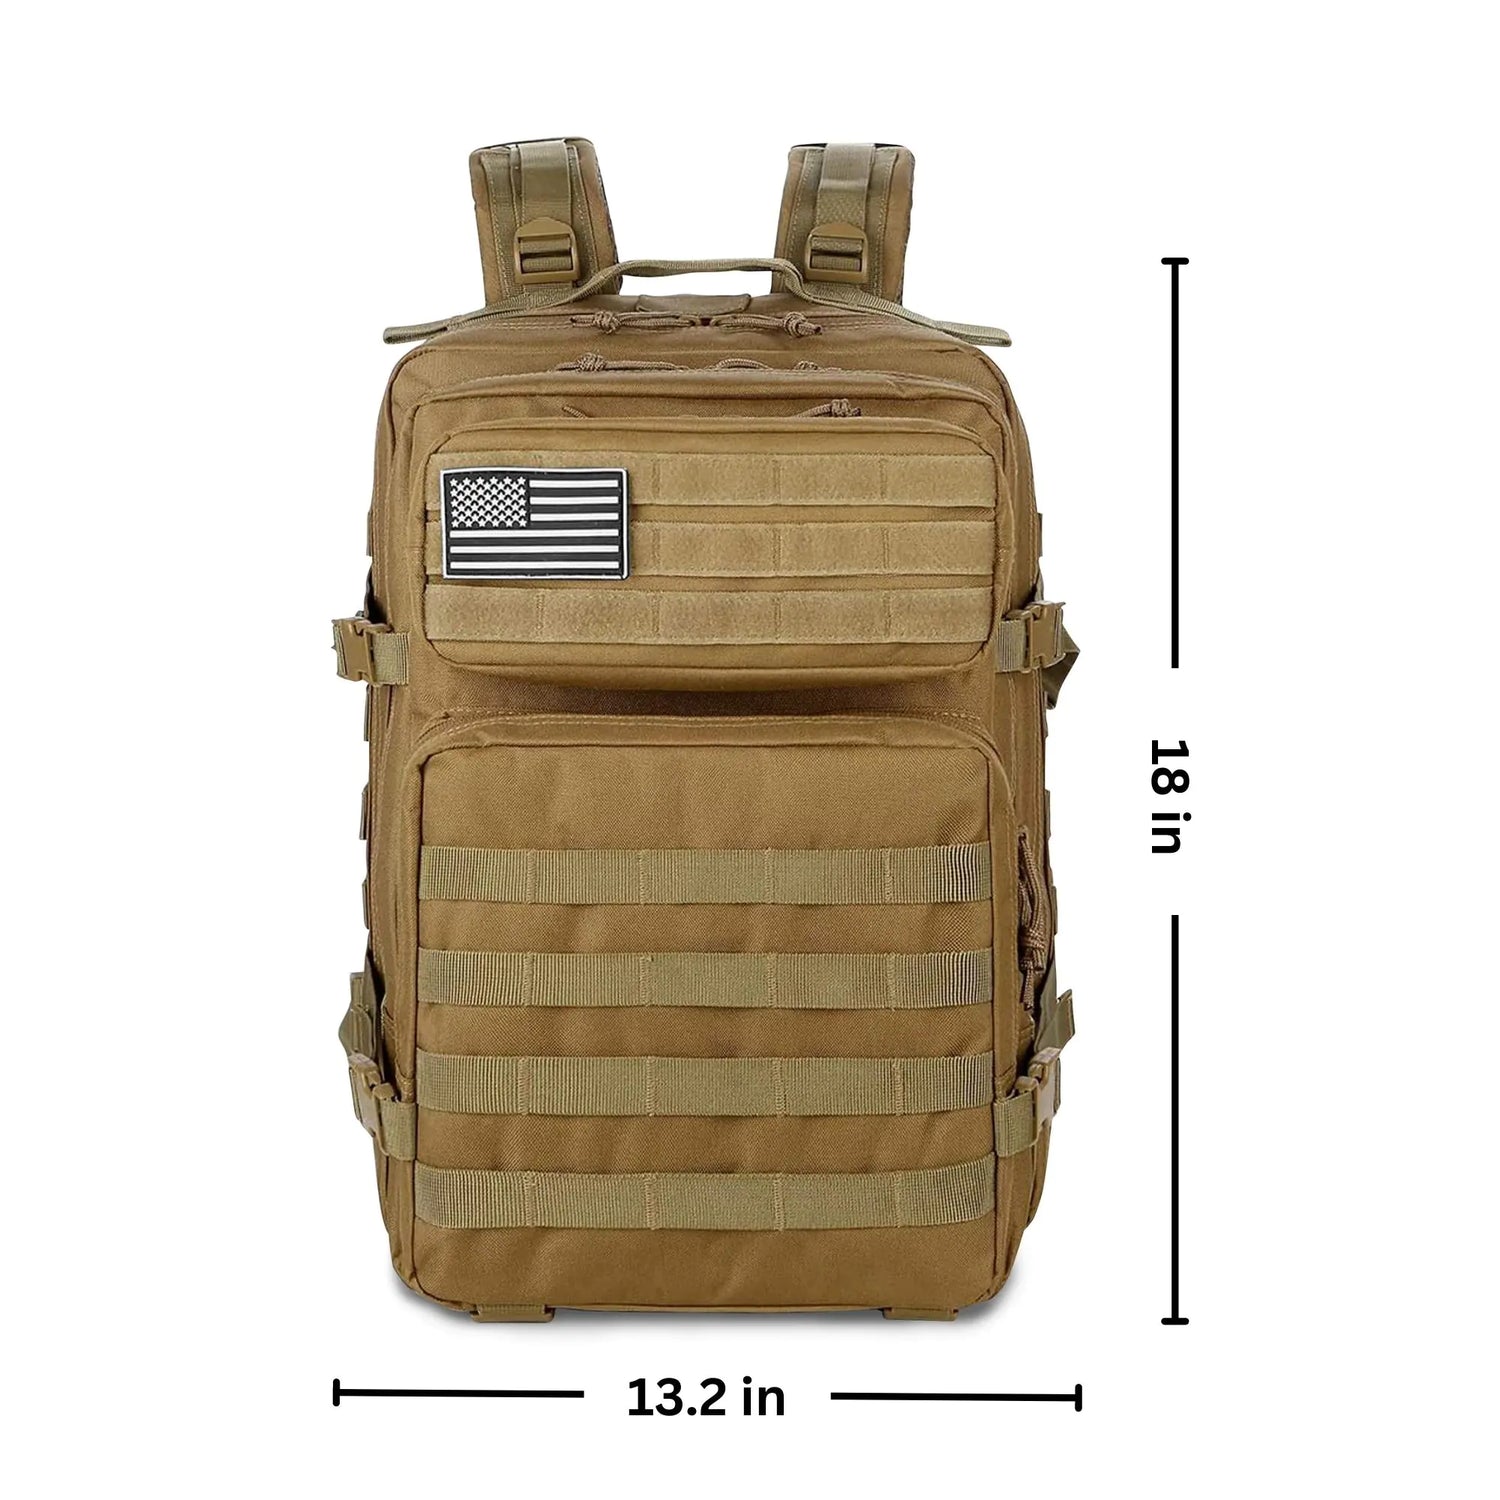 Large Military Tactical Backpack